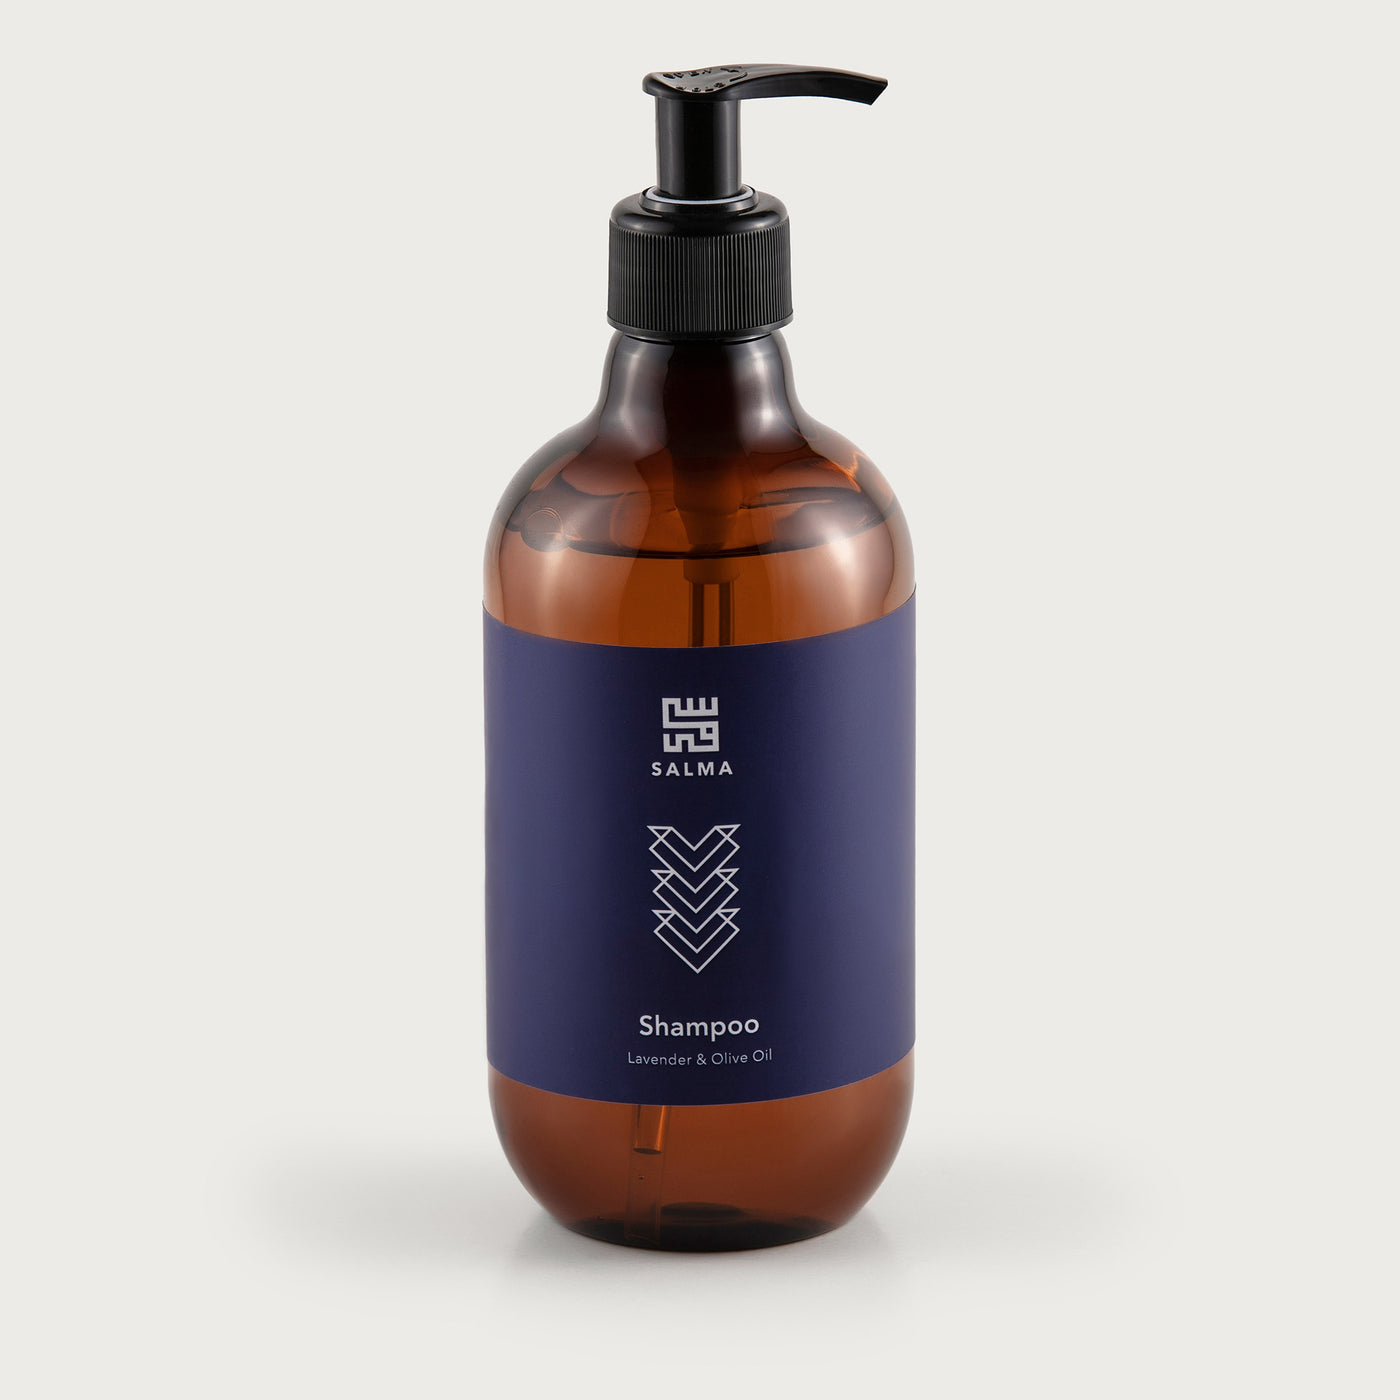 Shop The Latest Collection Of Salma Loves Beauty Shampoo Lavender And Olive Oil 500Ml - Slb 51 In Lebanon